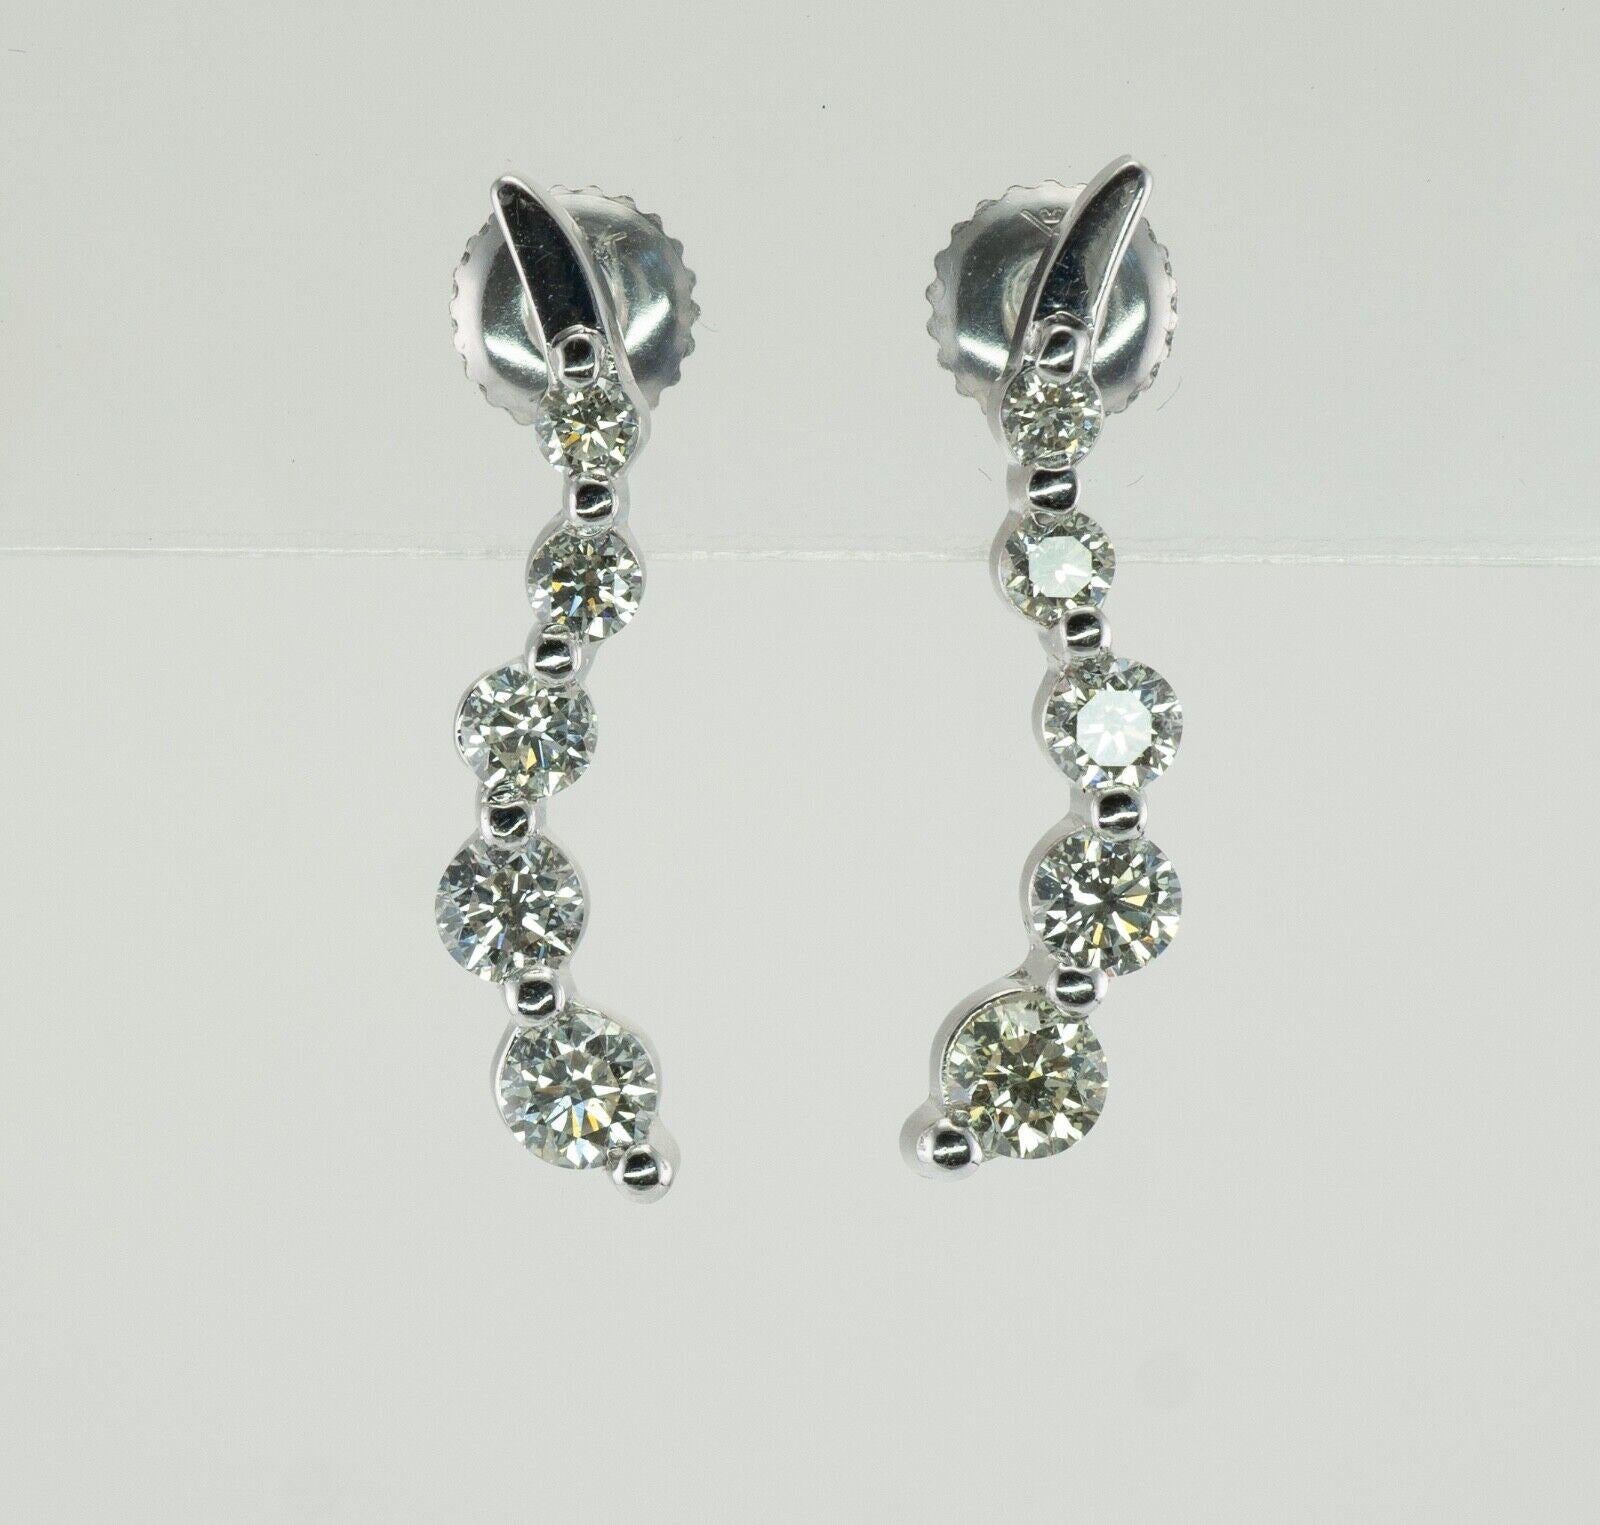 Natural Diamond Earrings 14K White Gold Dangle Bubbles

These beautiful and unusual earrings are finely crafted in solid 14K Wjote Gold (carefully tested and guaranteed). There are five diamonds in each earring. They graduate from .07 carat to .25